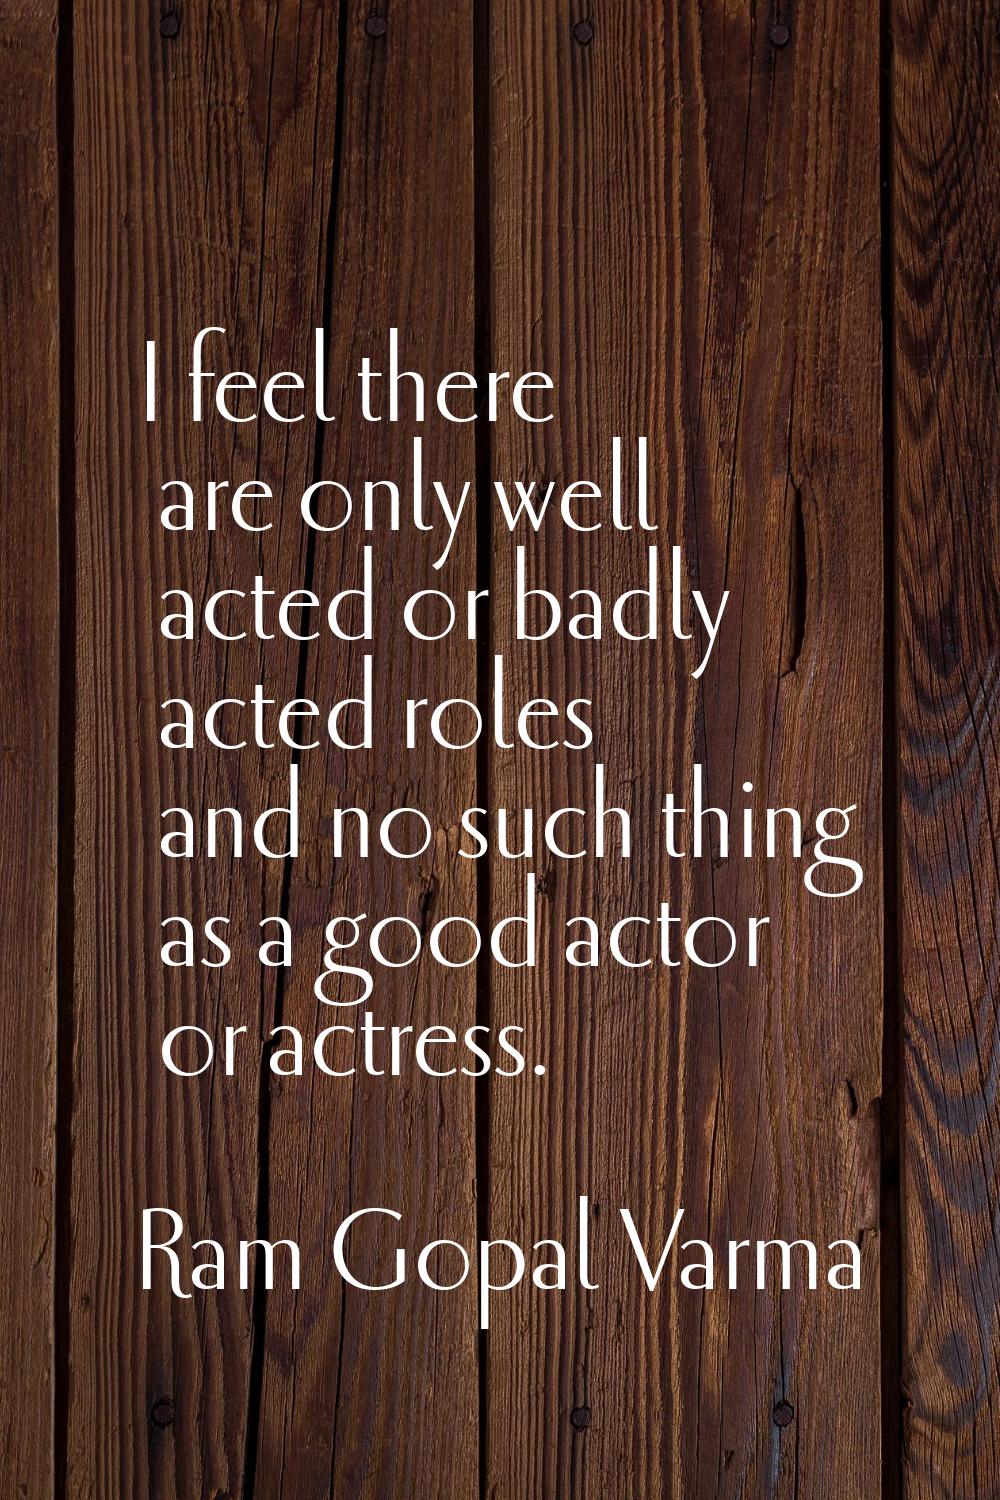 I feel there are only well acted or badly acted roles and no such thing as a good actor or actress.